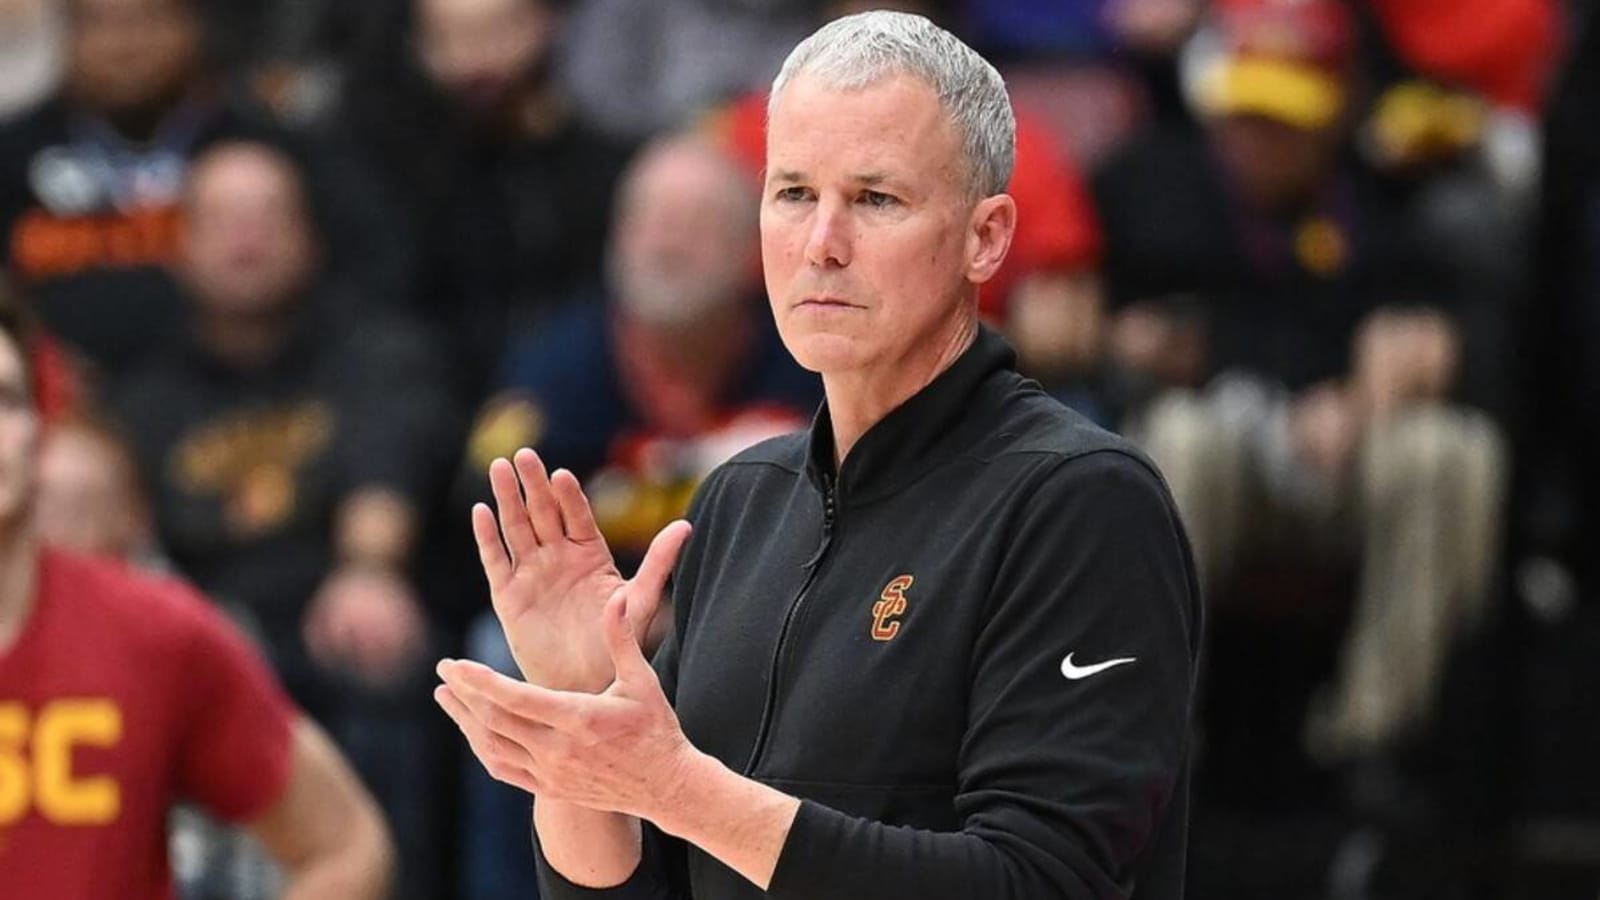 USC Basketball: Andy Enfield Sends Mixed Message to Team About Recent Play